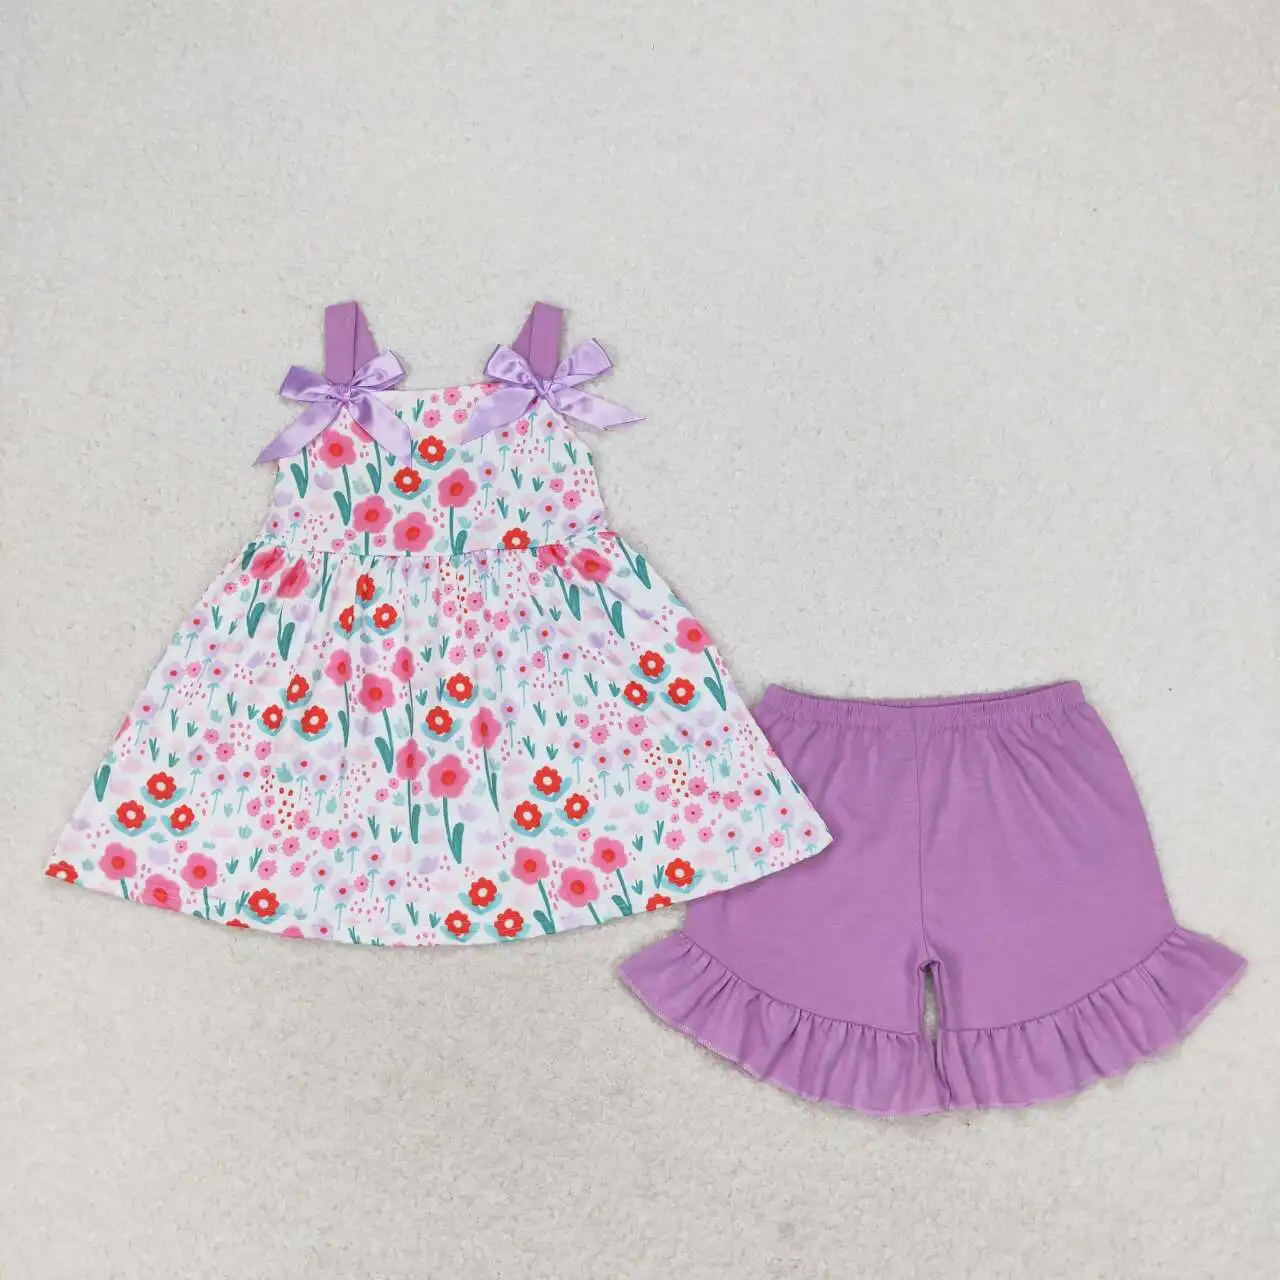 

Baby Girls Floral outfits summer clothing Toddlers wholesale boutique Baby Short Sleeves Top purple Shorts Kids new arrival sets